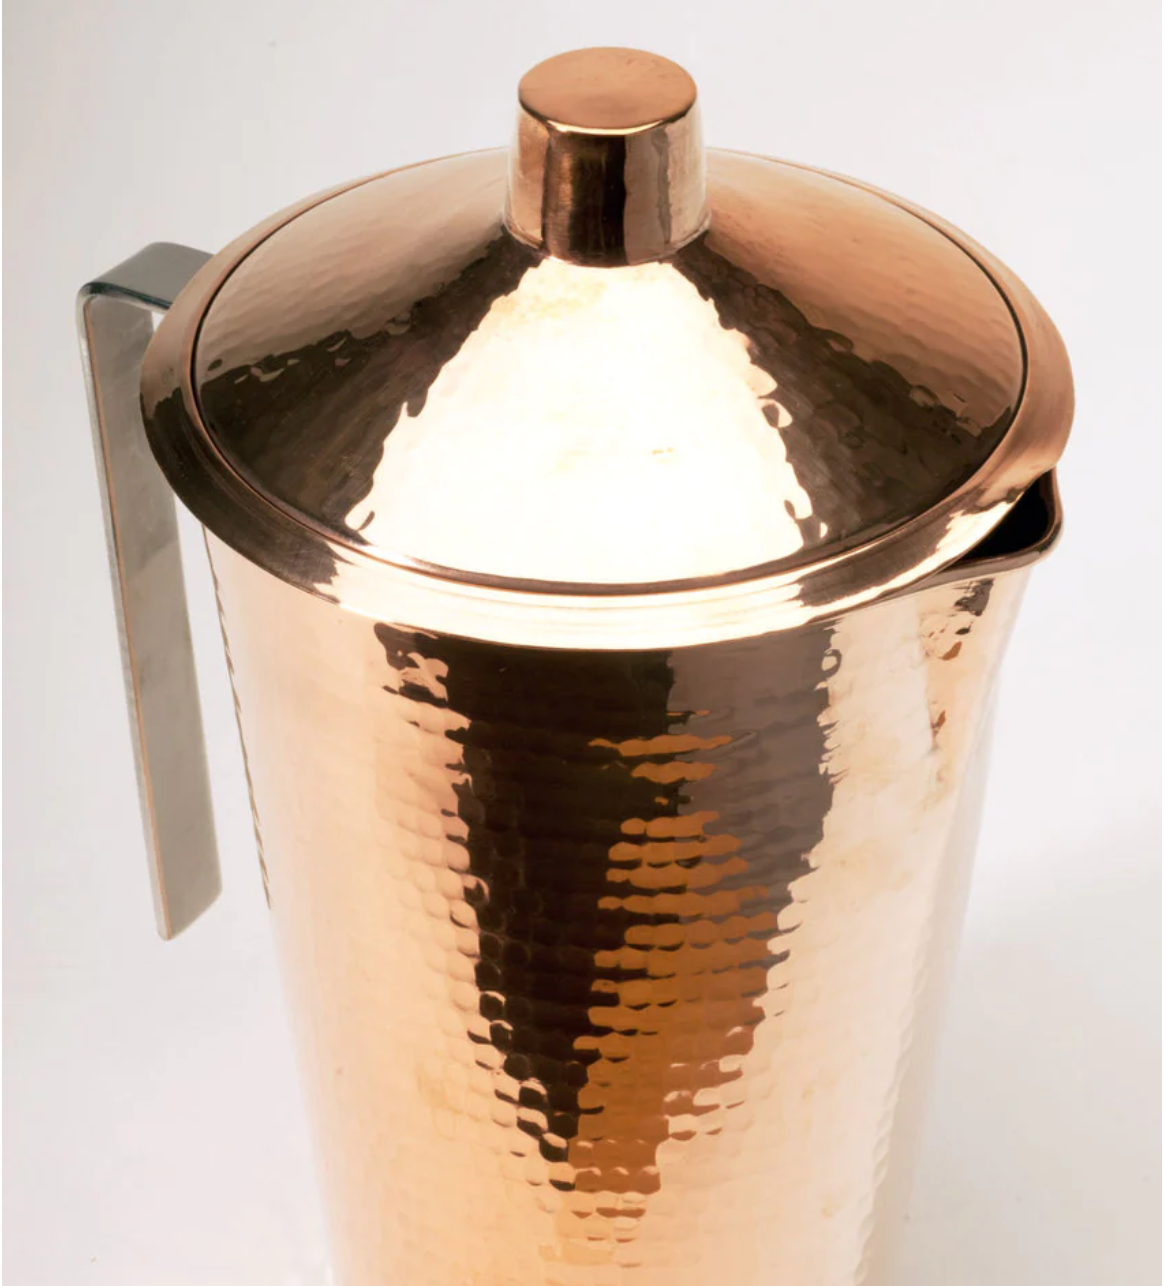 Copper Water Pitcher with Lid